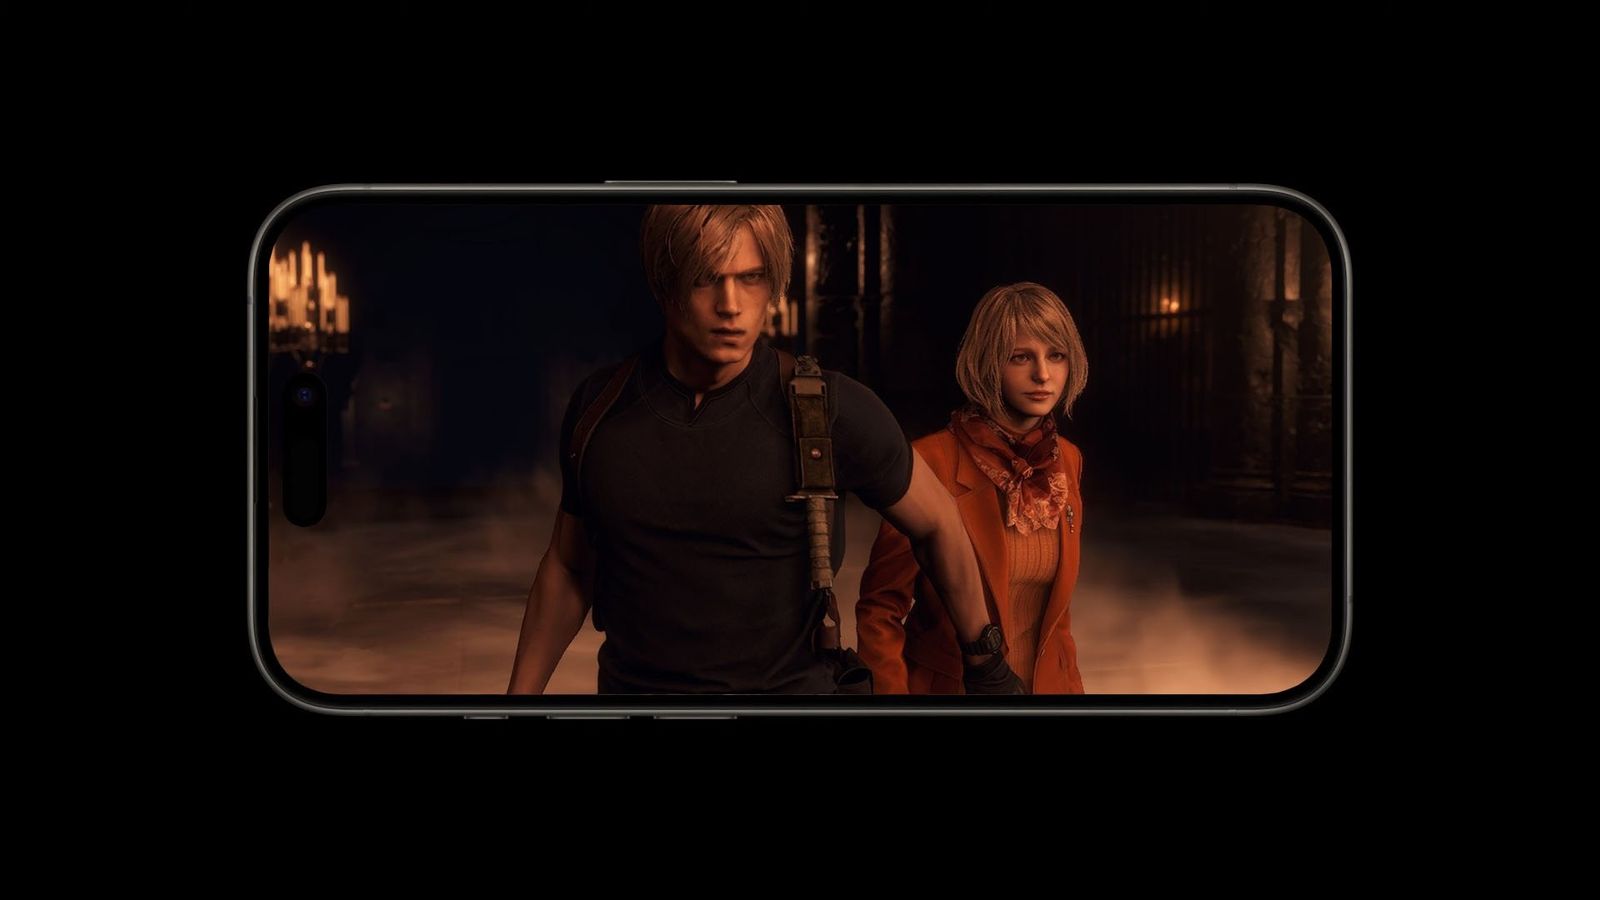 Leon Kennedy from Resident Evil 4 standing next to Ashley in screenshot on an iPhone 15 Pro Max